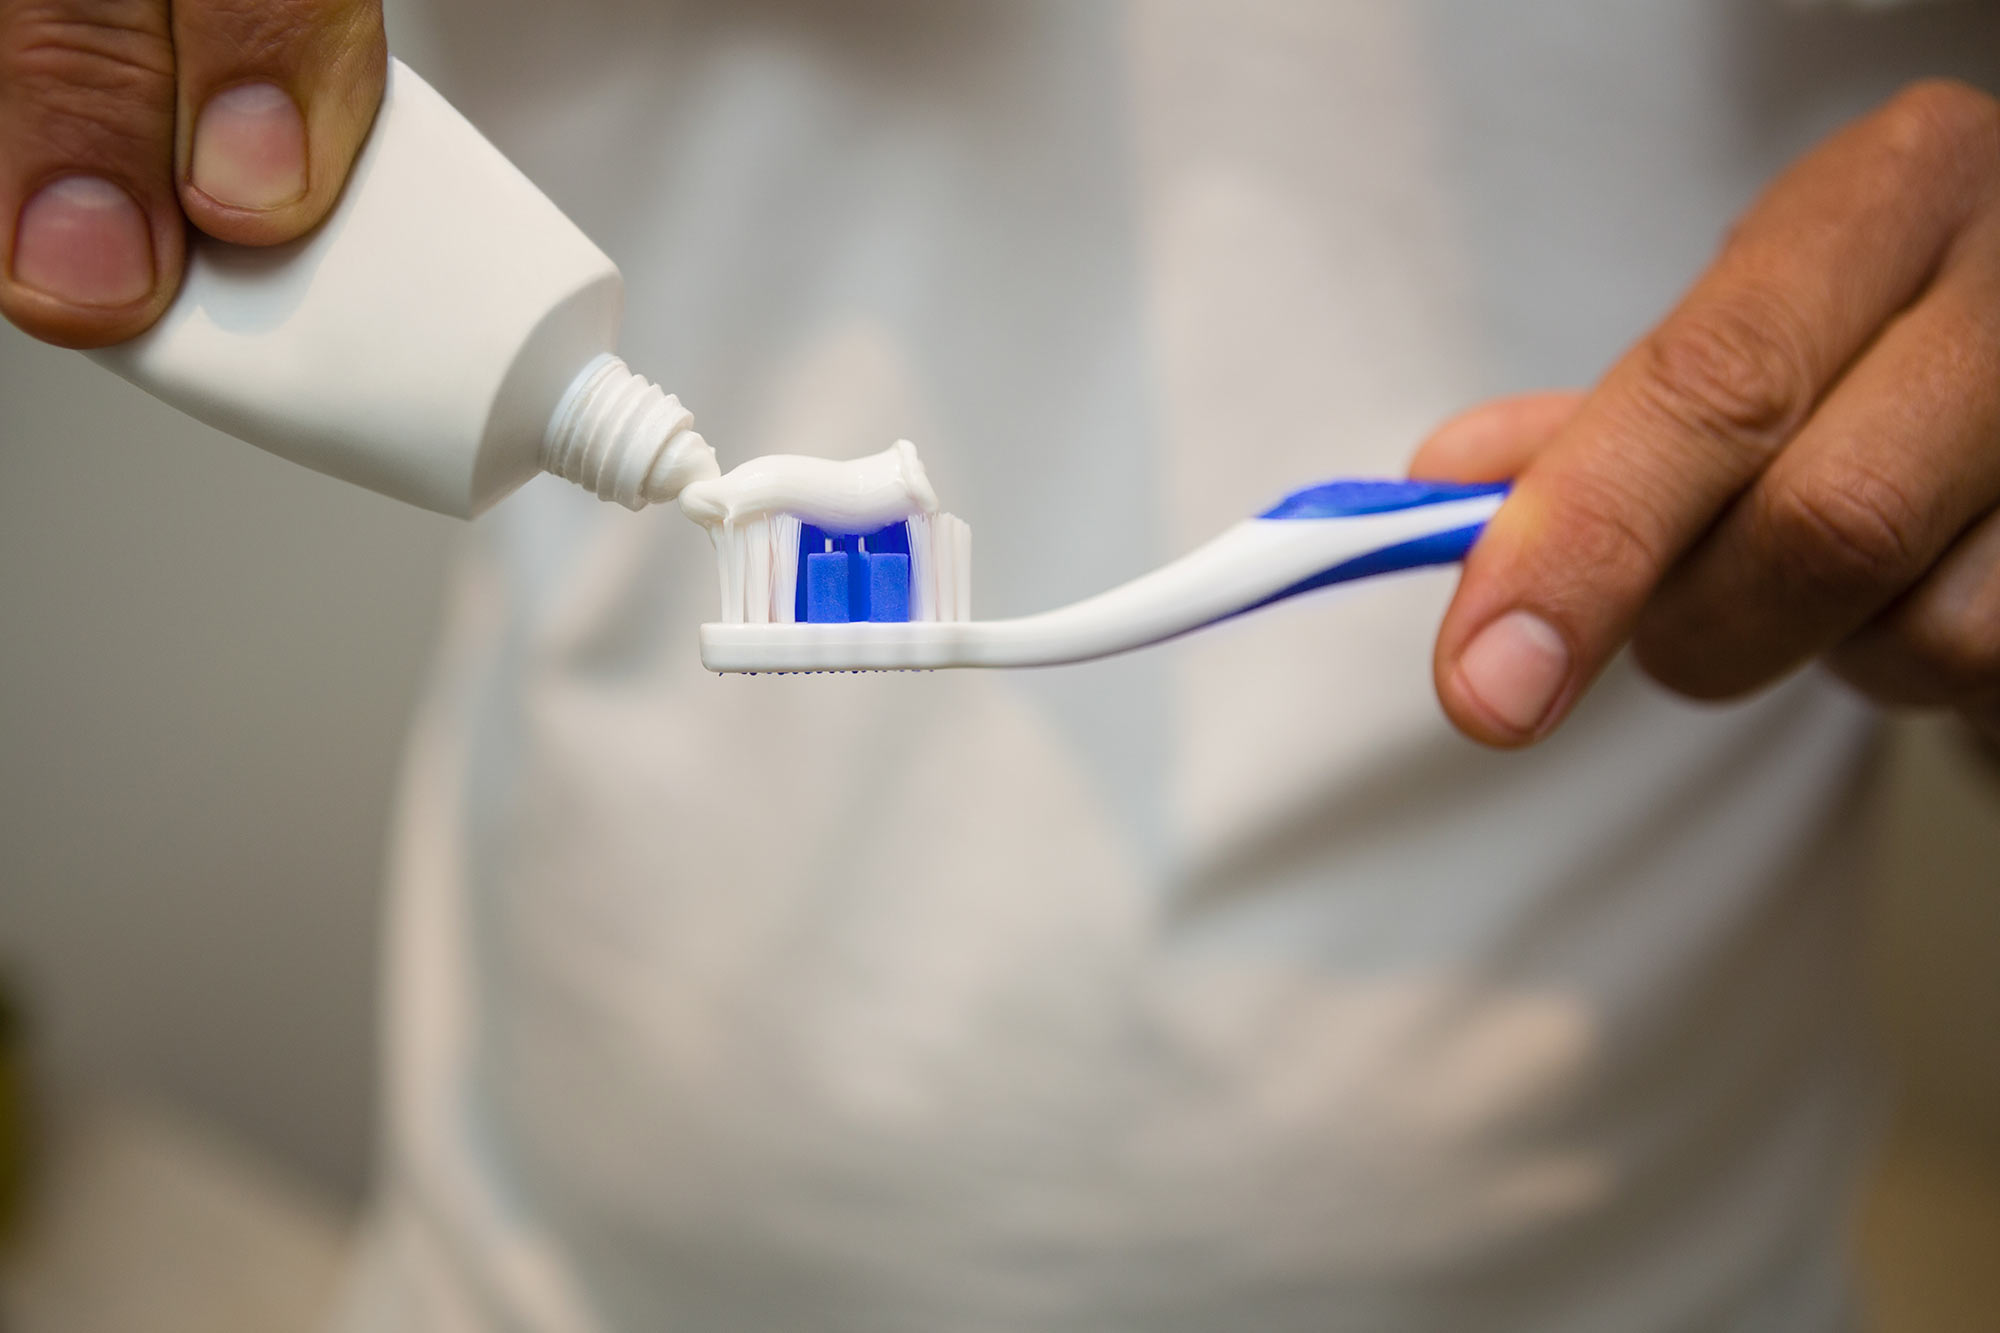 A dentist is urging dental teams to spread oral health messages to help fight coronavirus